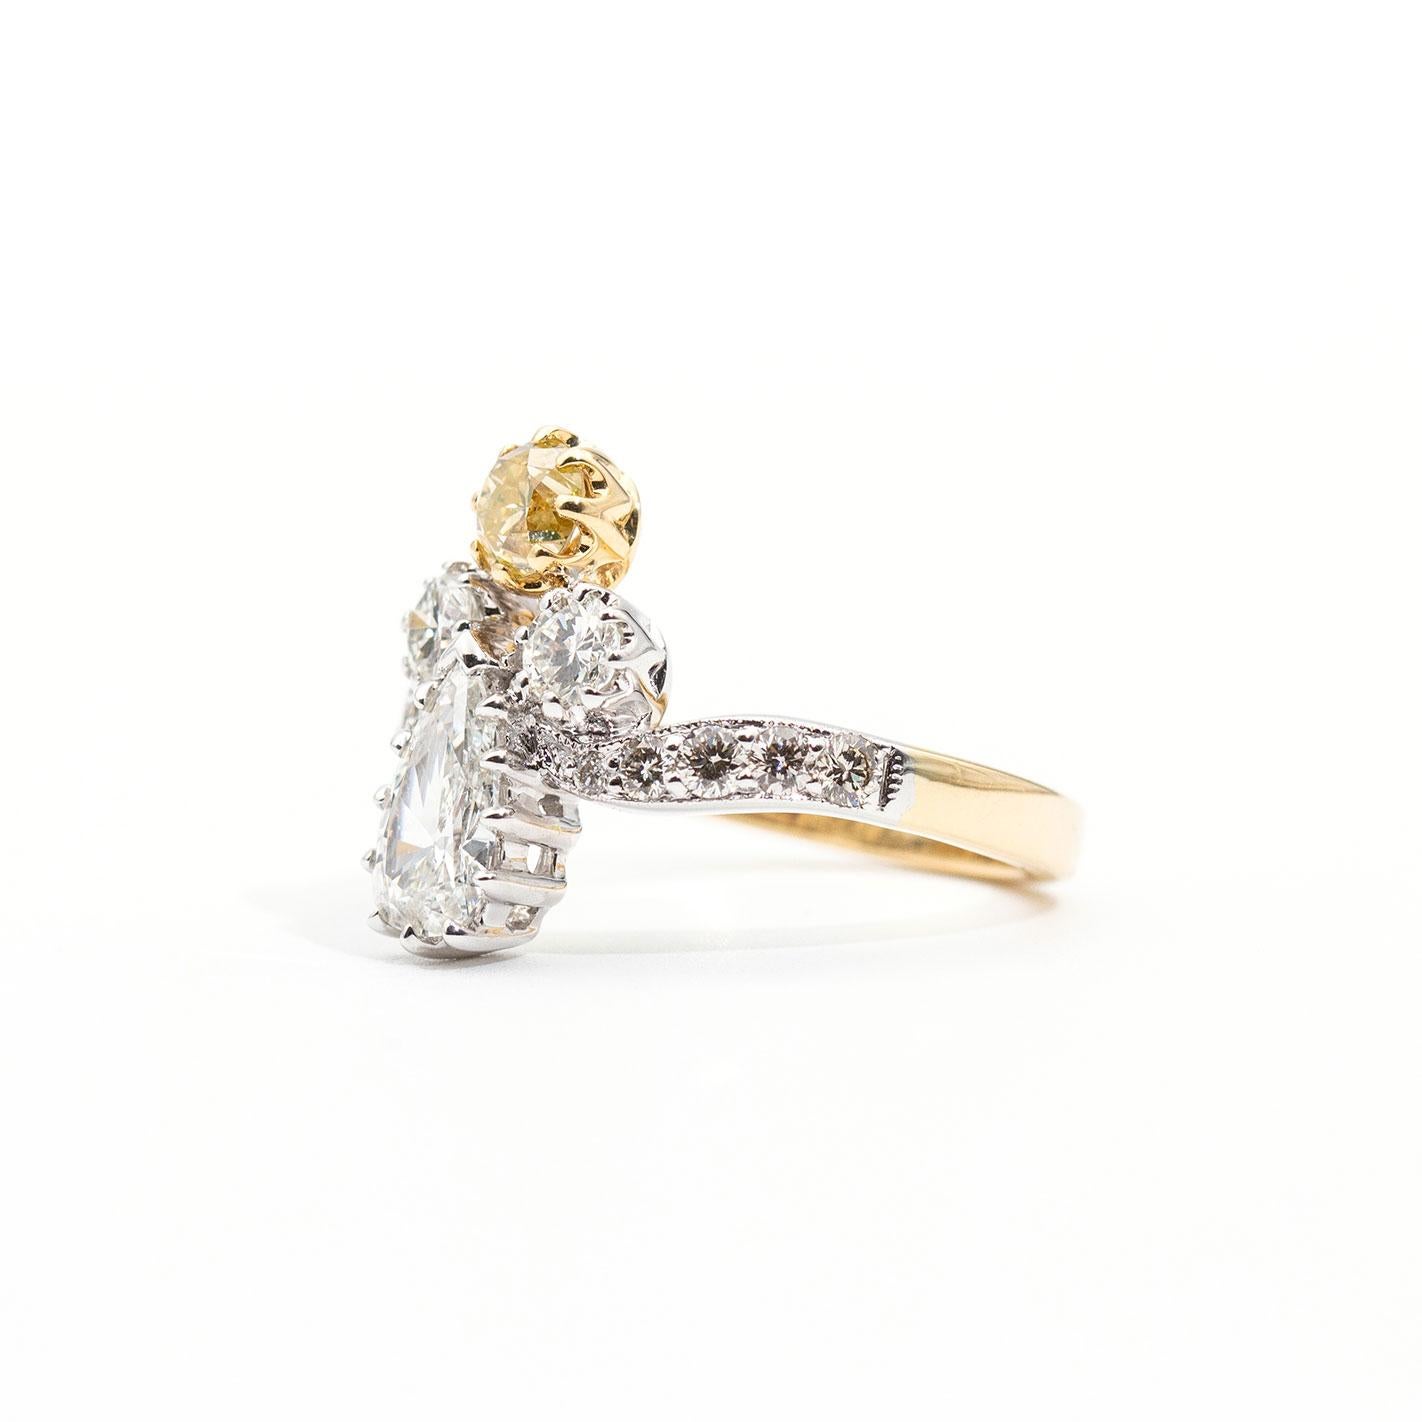 Contemporary Certified 0.70 Carat Pear and Fancy Yellow Diamond Vintage 18 Carat Gold Ring